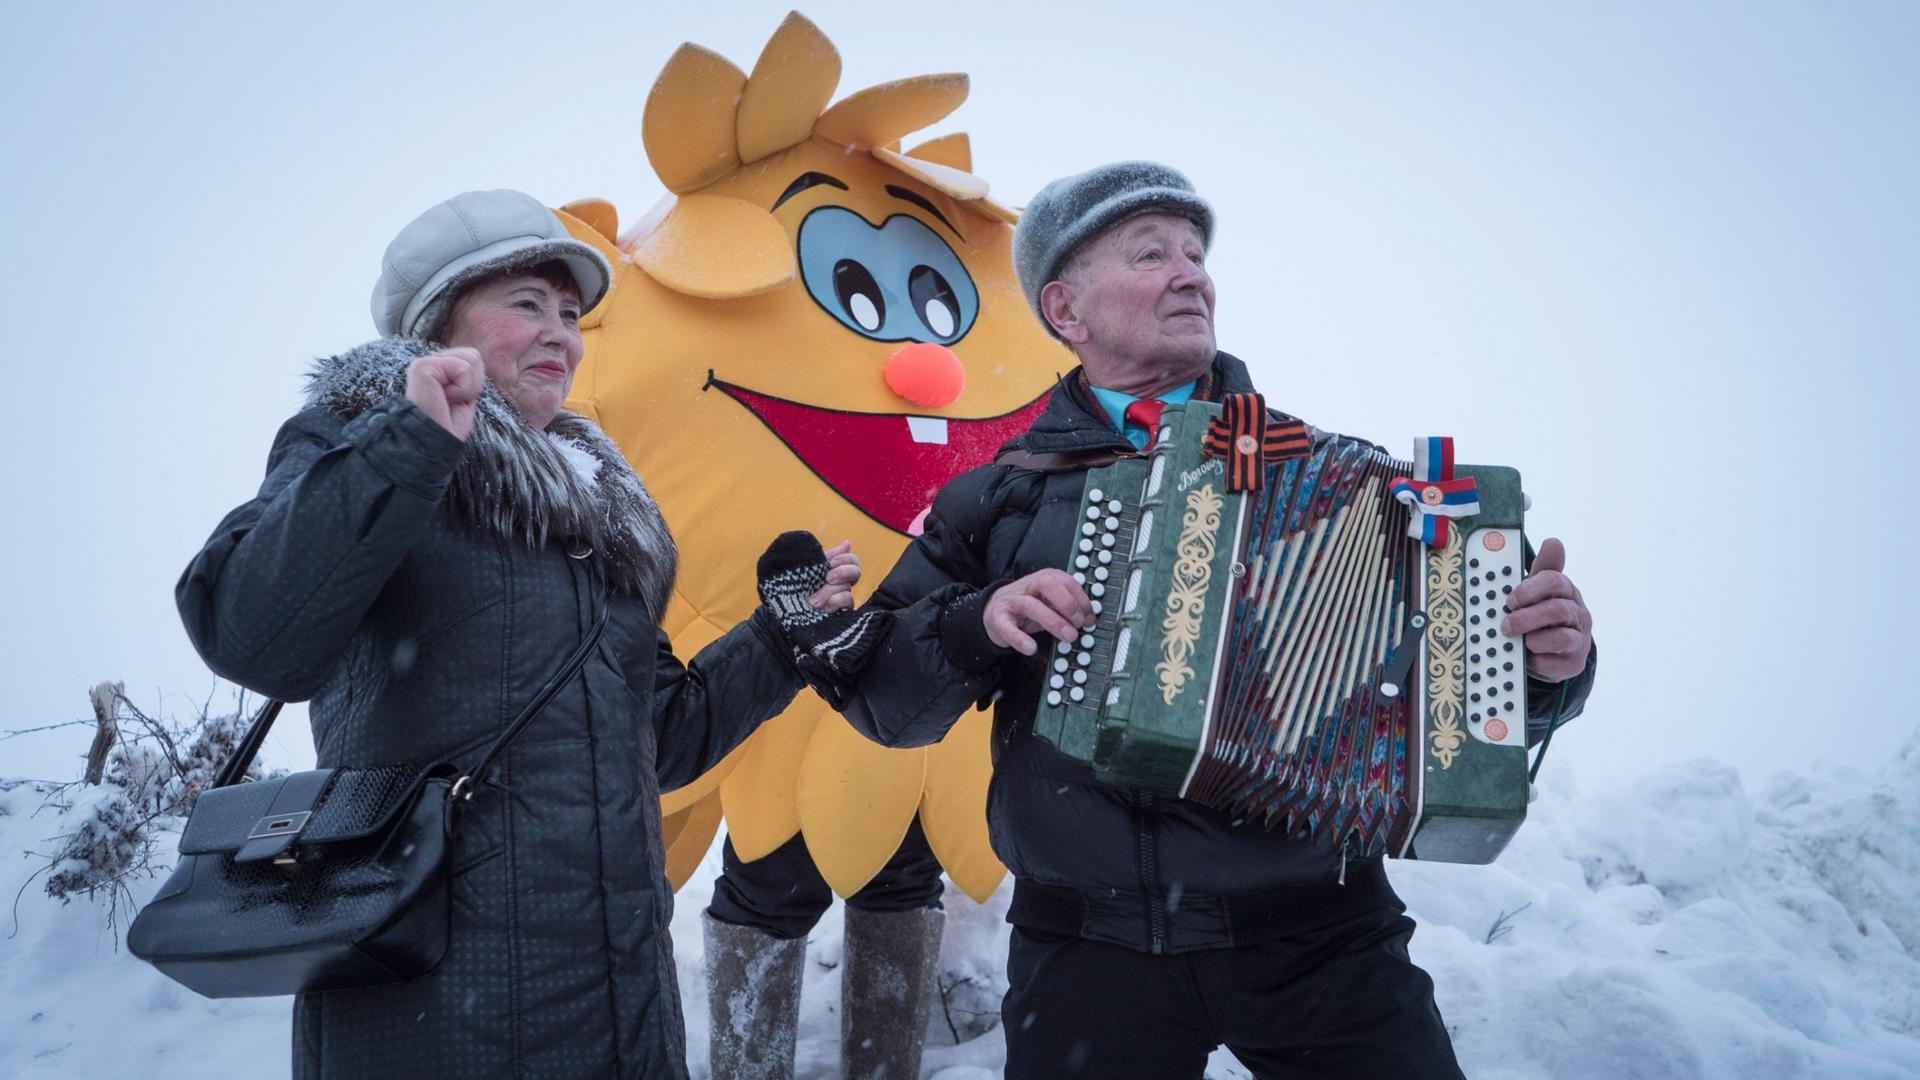 An older man is shown playing an accordion with a person dressed up in a sun costume stands behind him.